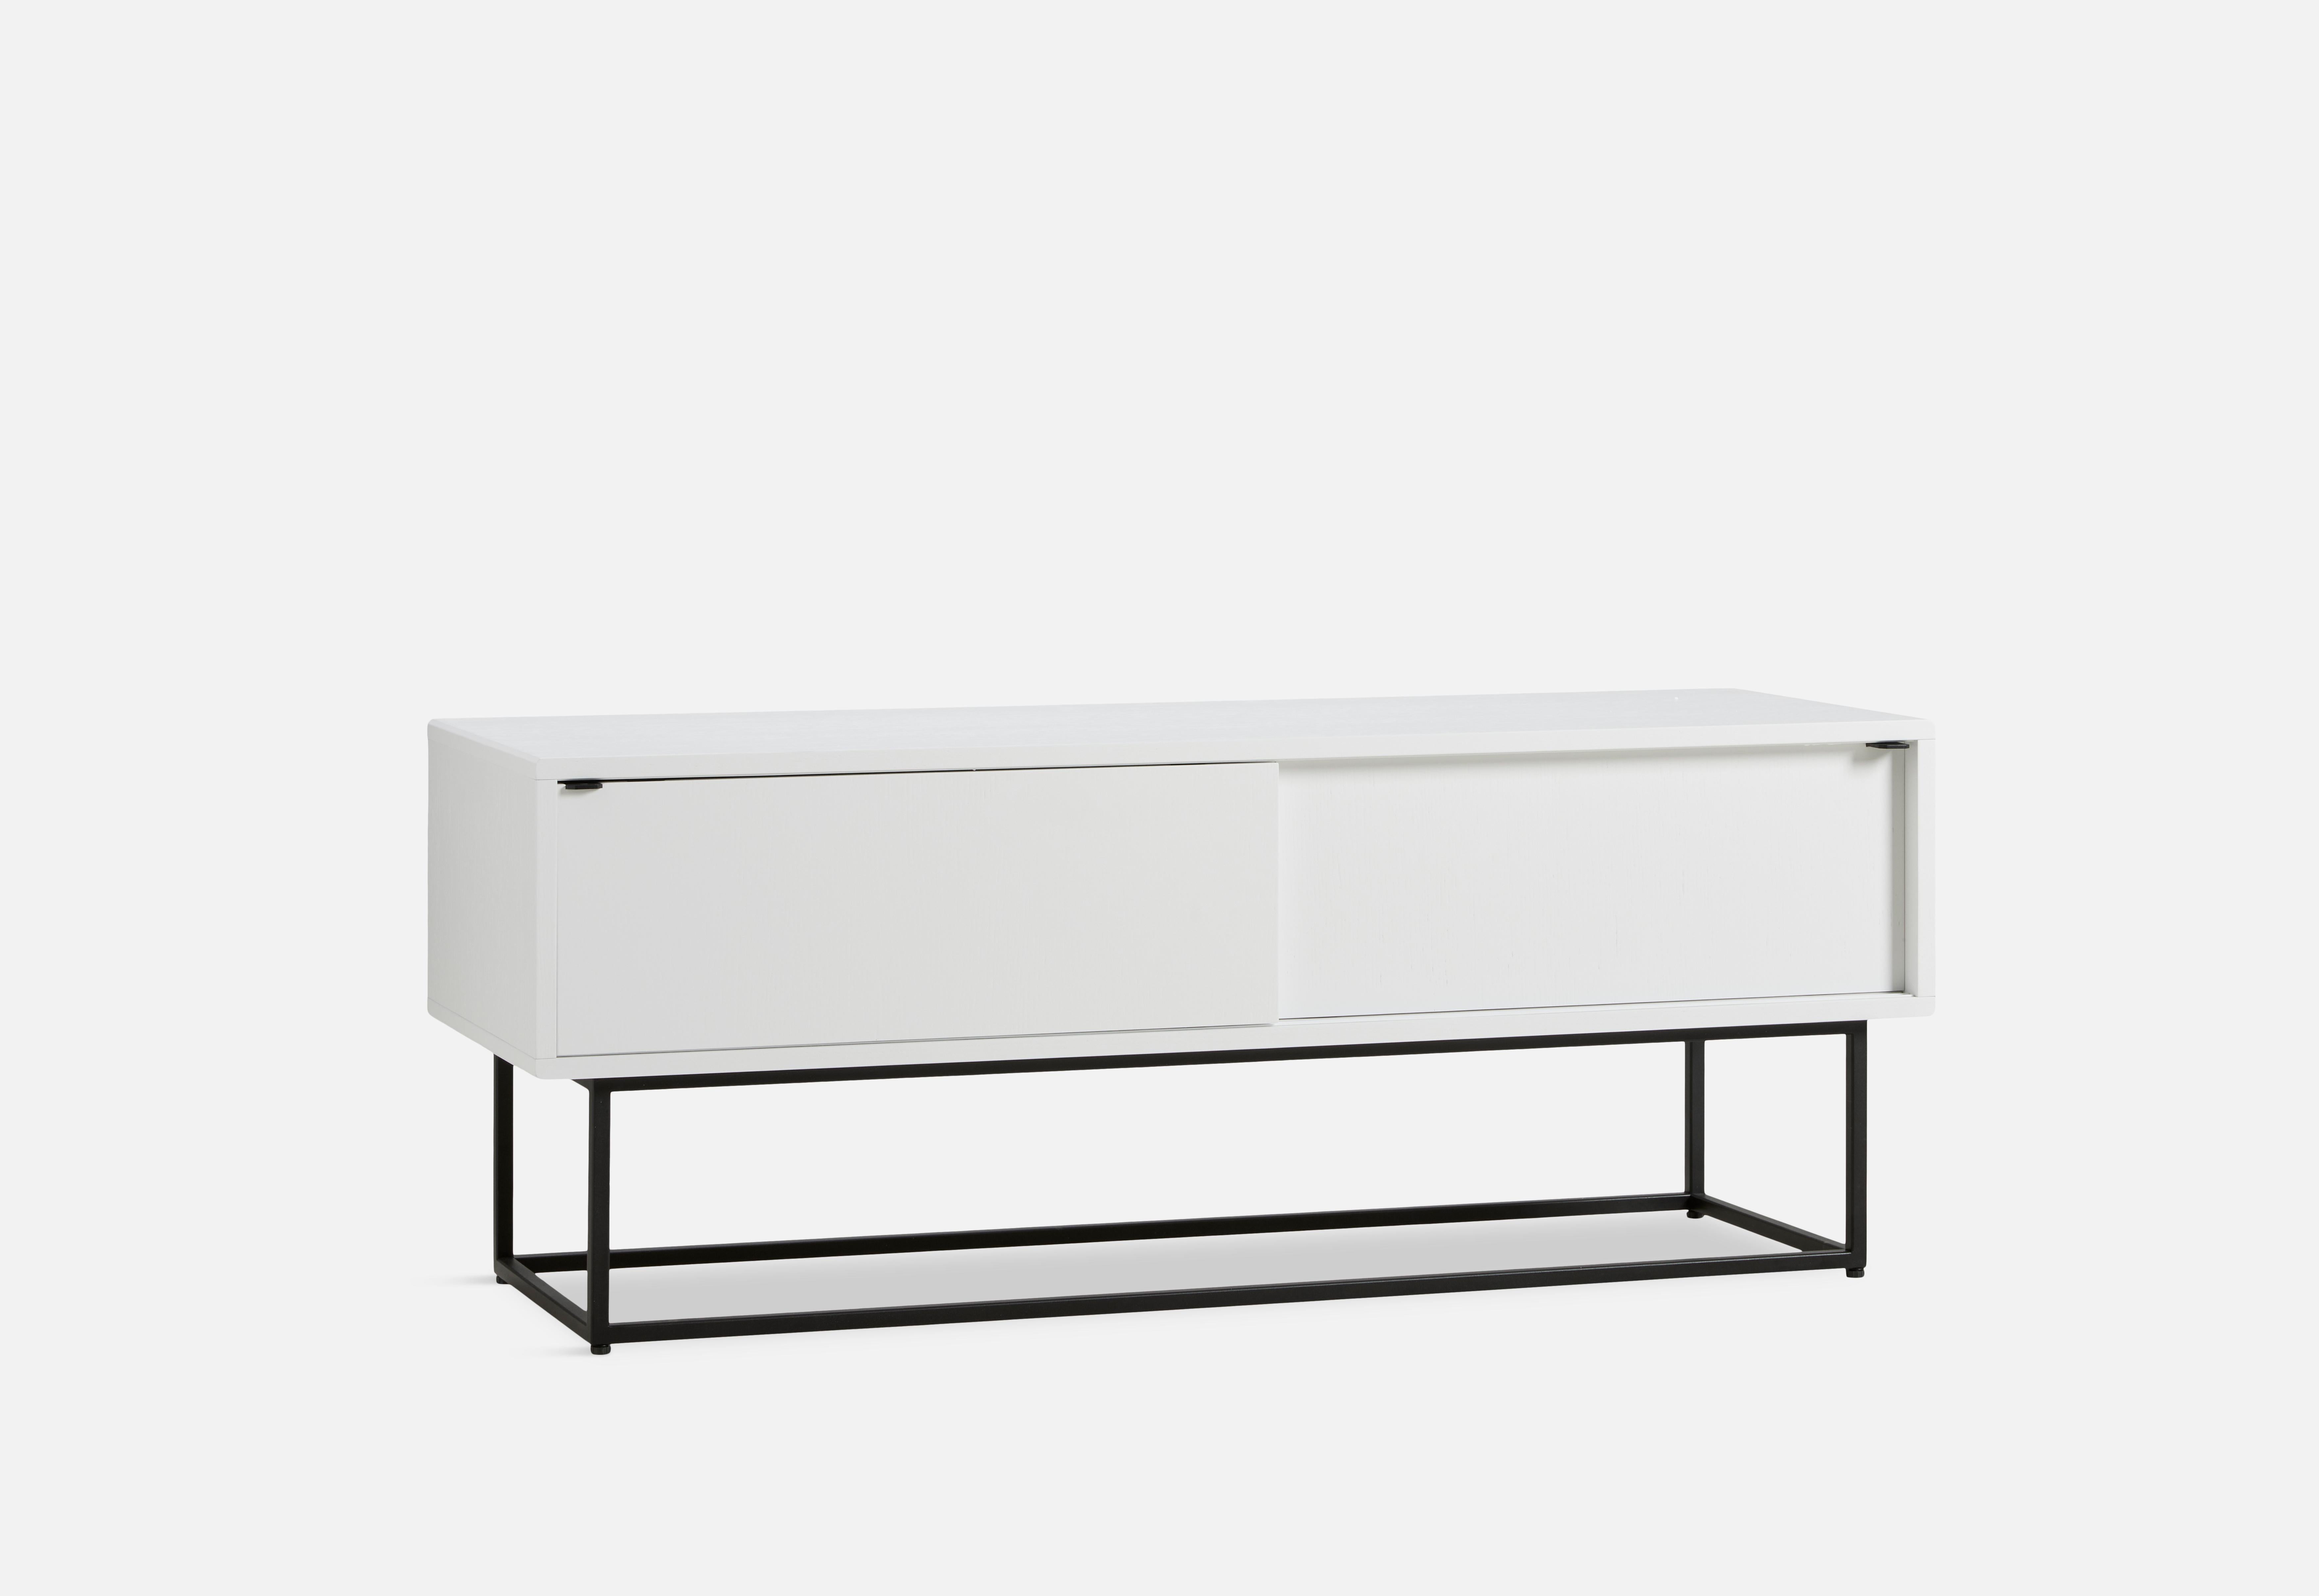 White oak virka low sideboard by Ropke Design and Moaak
Materials: Oak, Metal.
Dimensions: D 40 x W 120 x H 47 cm
Also available in different colours and materials.

The founders, Mia and Torben Koed, decided to put their 30 years of experience